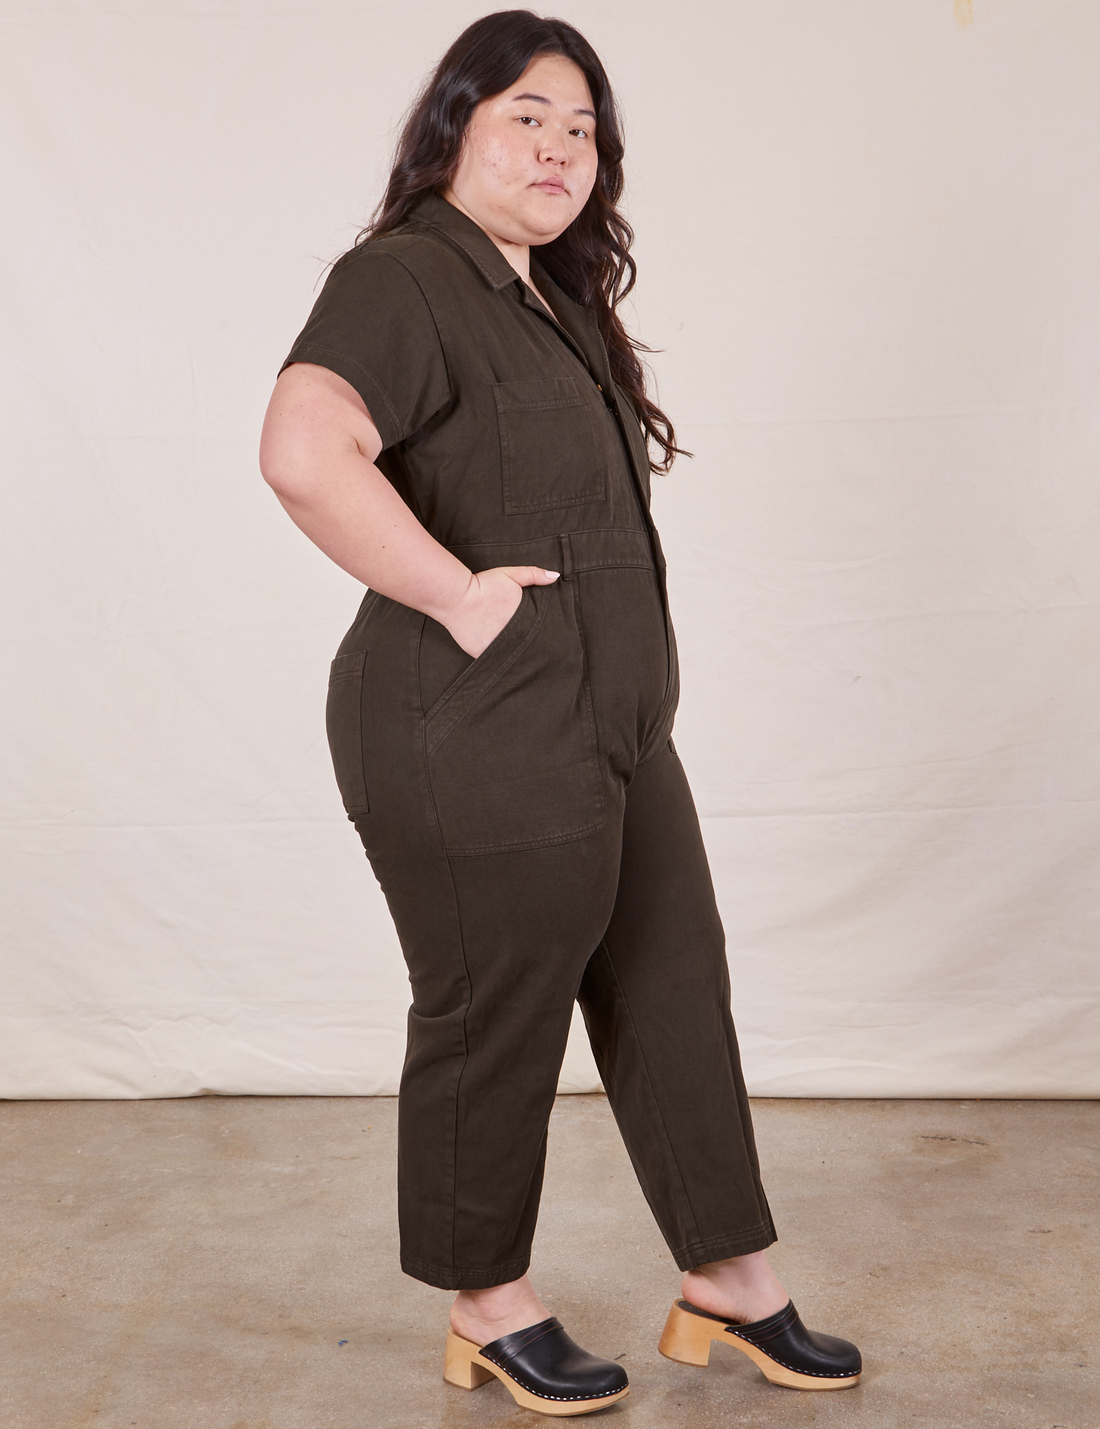 Petite Short Sleeve Jumpsuit in Espresso Brown side view on Ashley